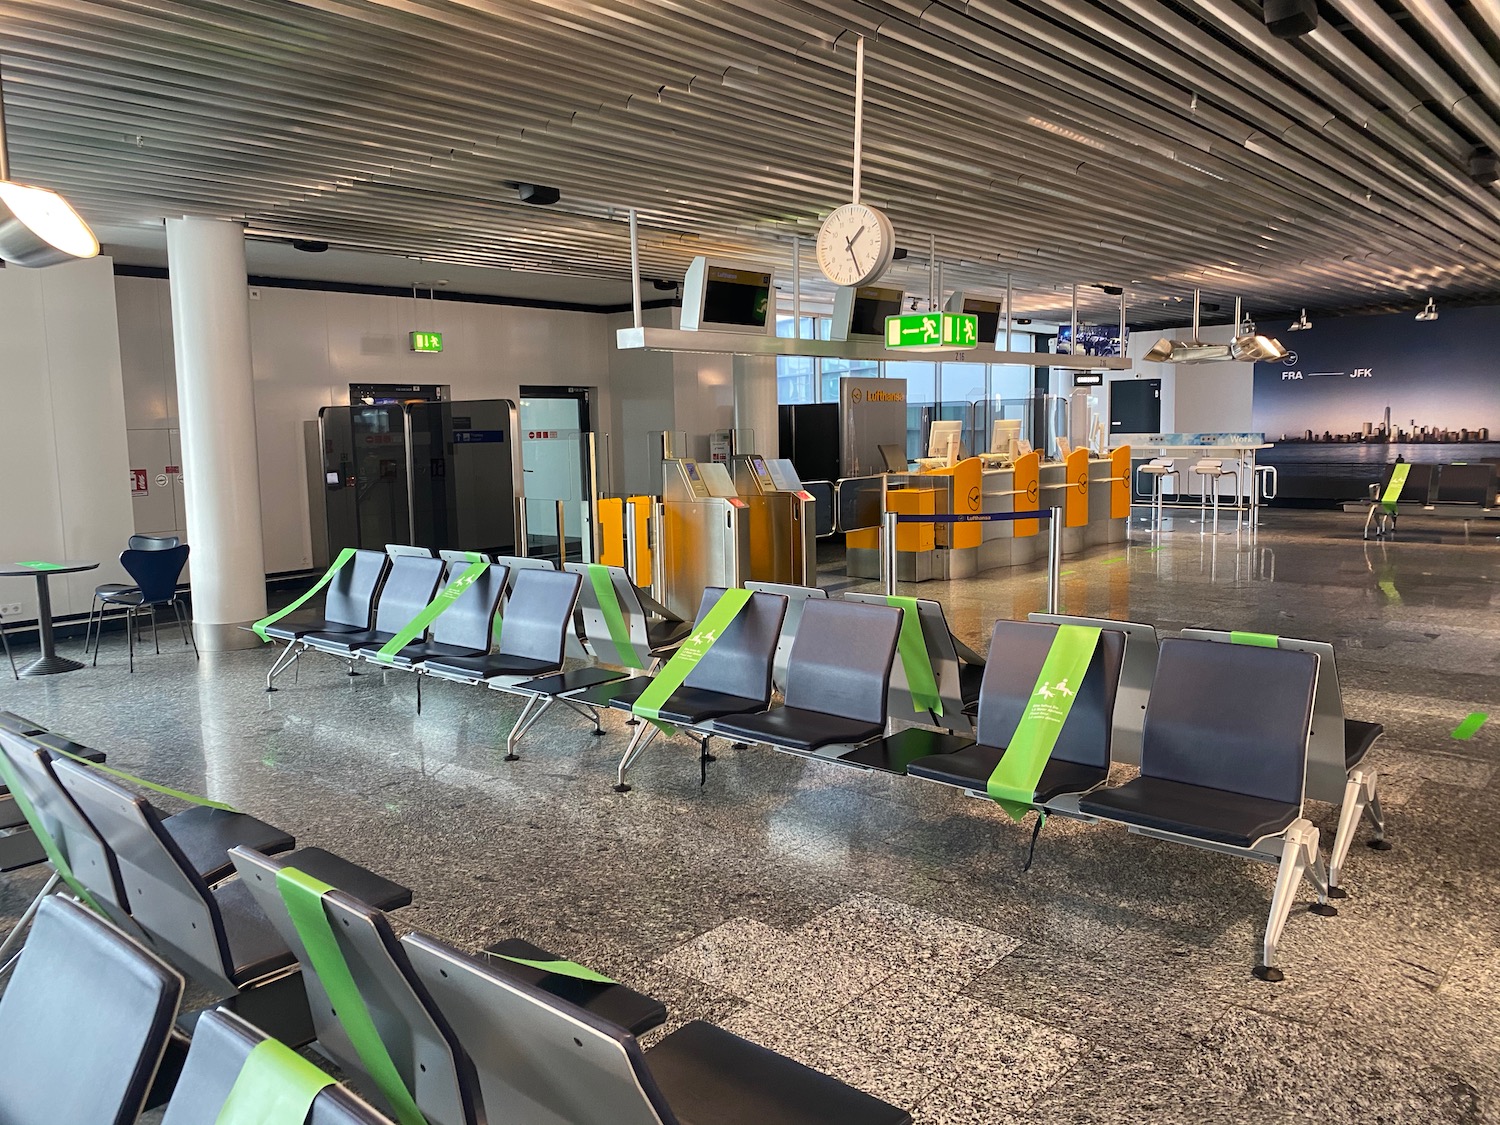 a row of chairs in a terminal